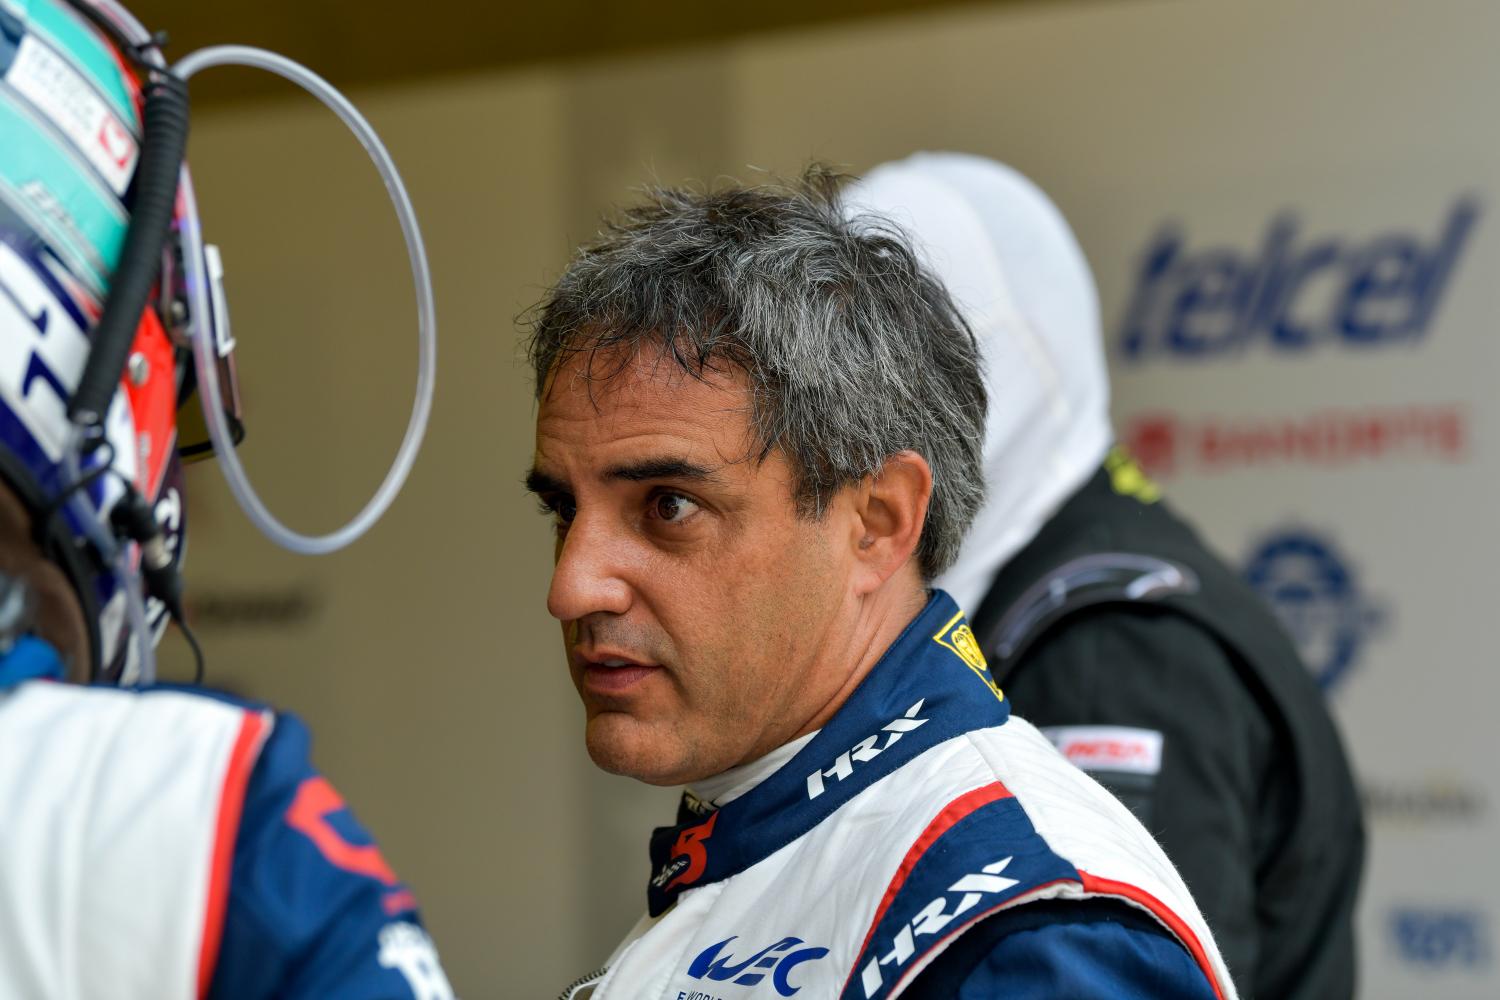 declare Management Every week 24 Hours of Le Mans – Juan Pablo Montoya: "I really want to try and win!" |  24h-lemans.com